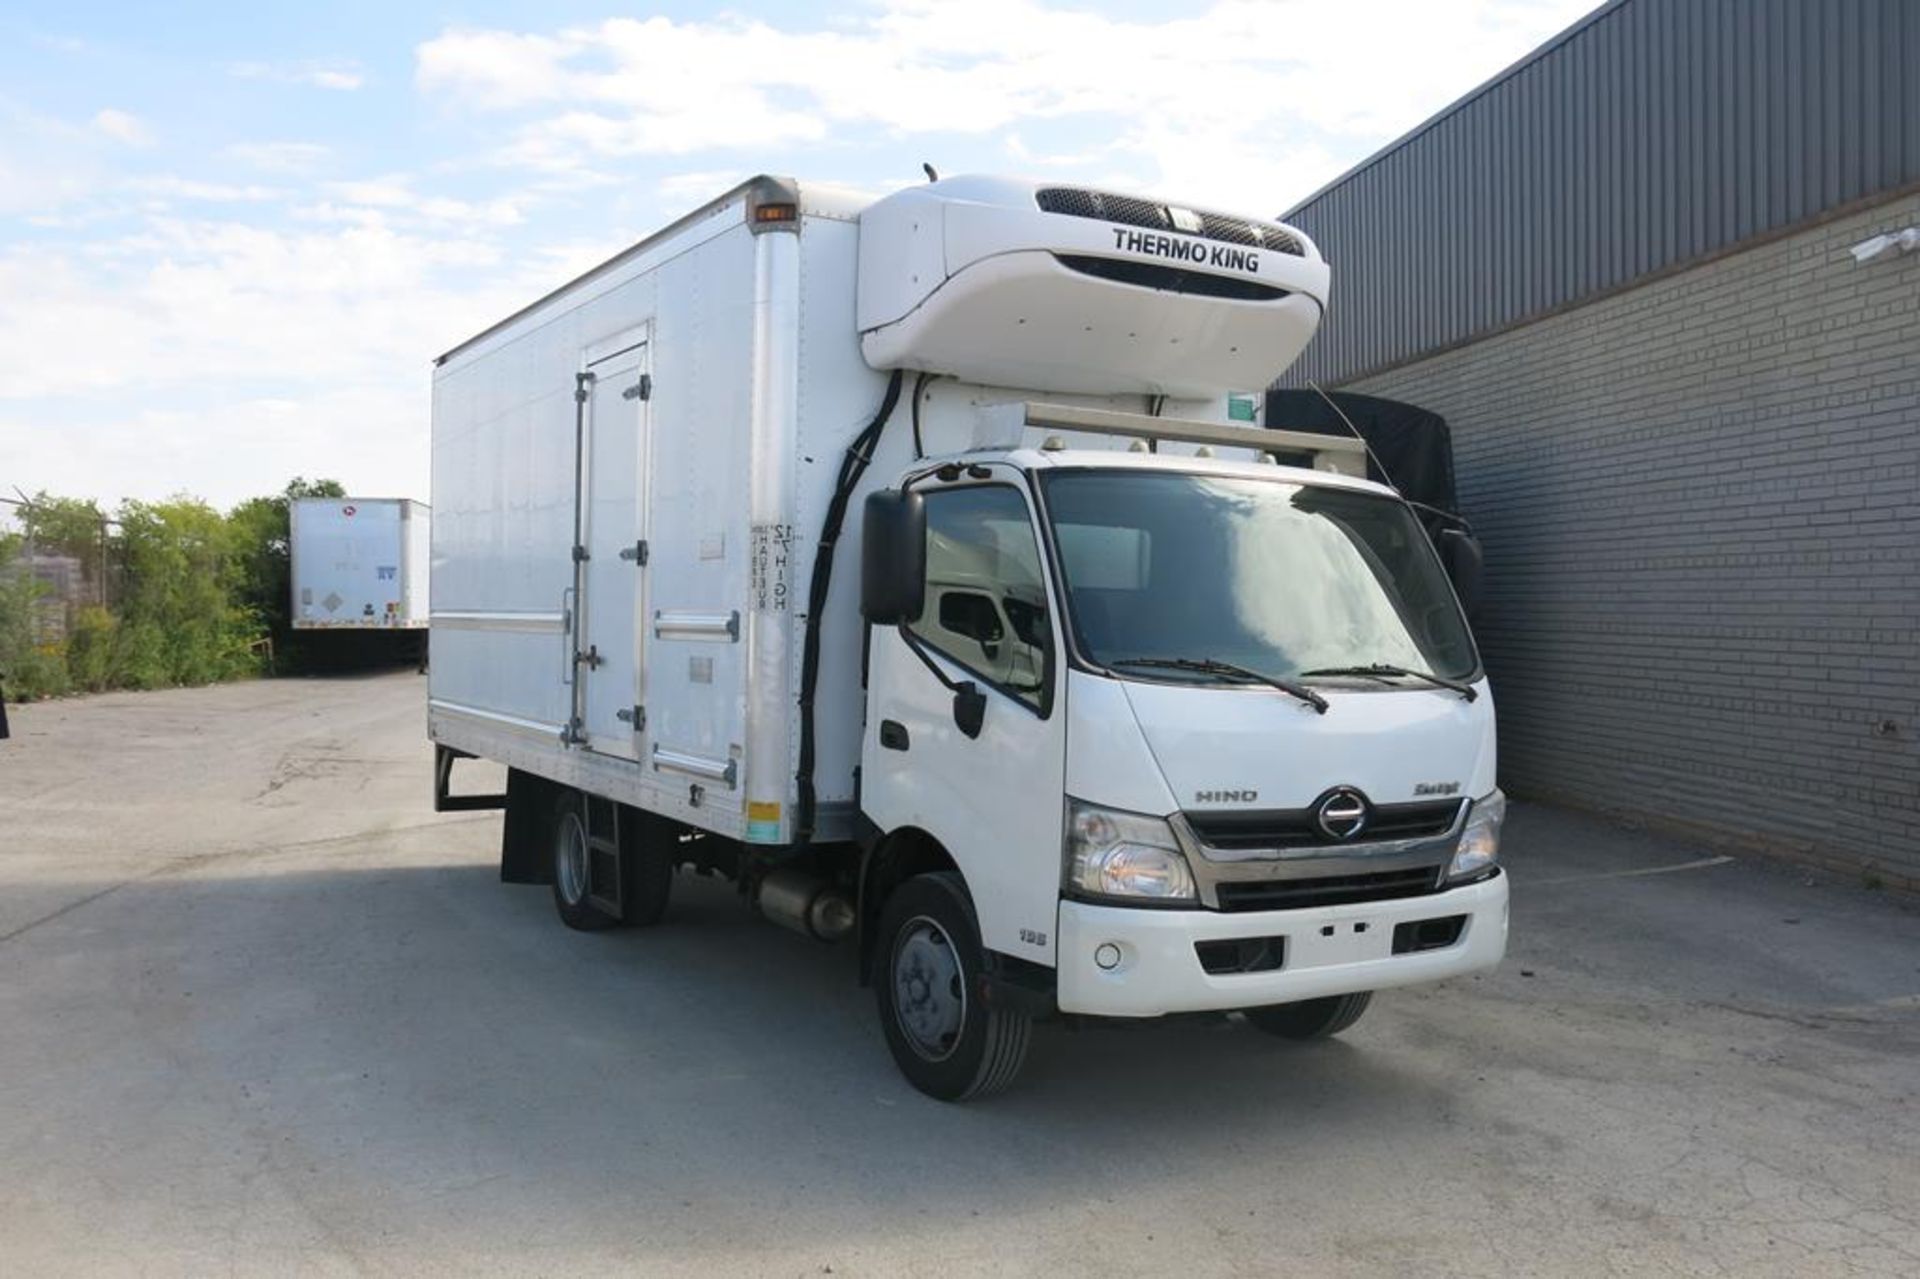 2013, HINO, 195, REEFER TRUCK, MULTIVANS, 18', INSULATED BOX, THERMOKING, T800 WHISPER, REEFER, - Image 3 of 26